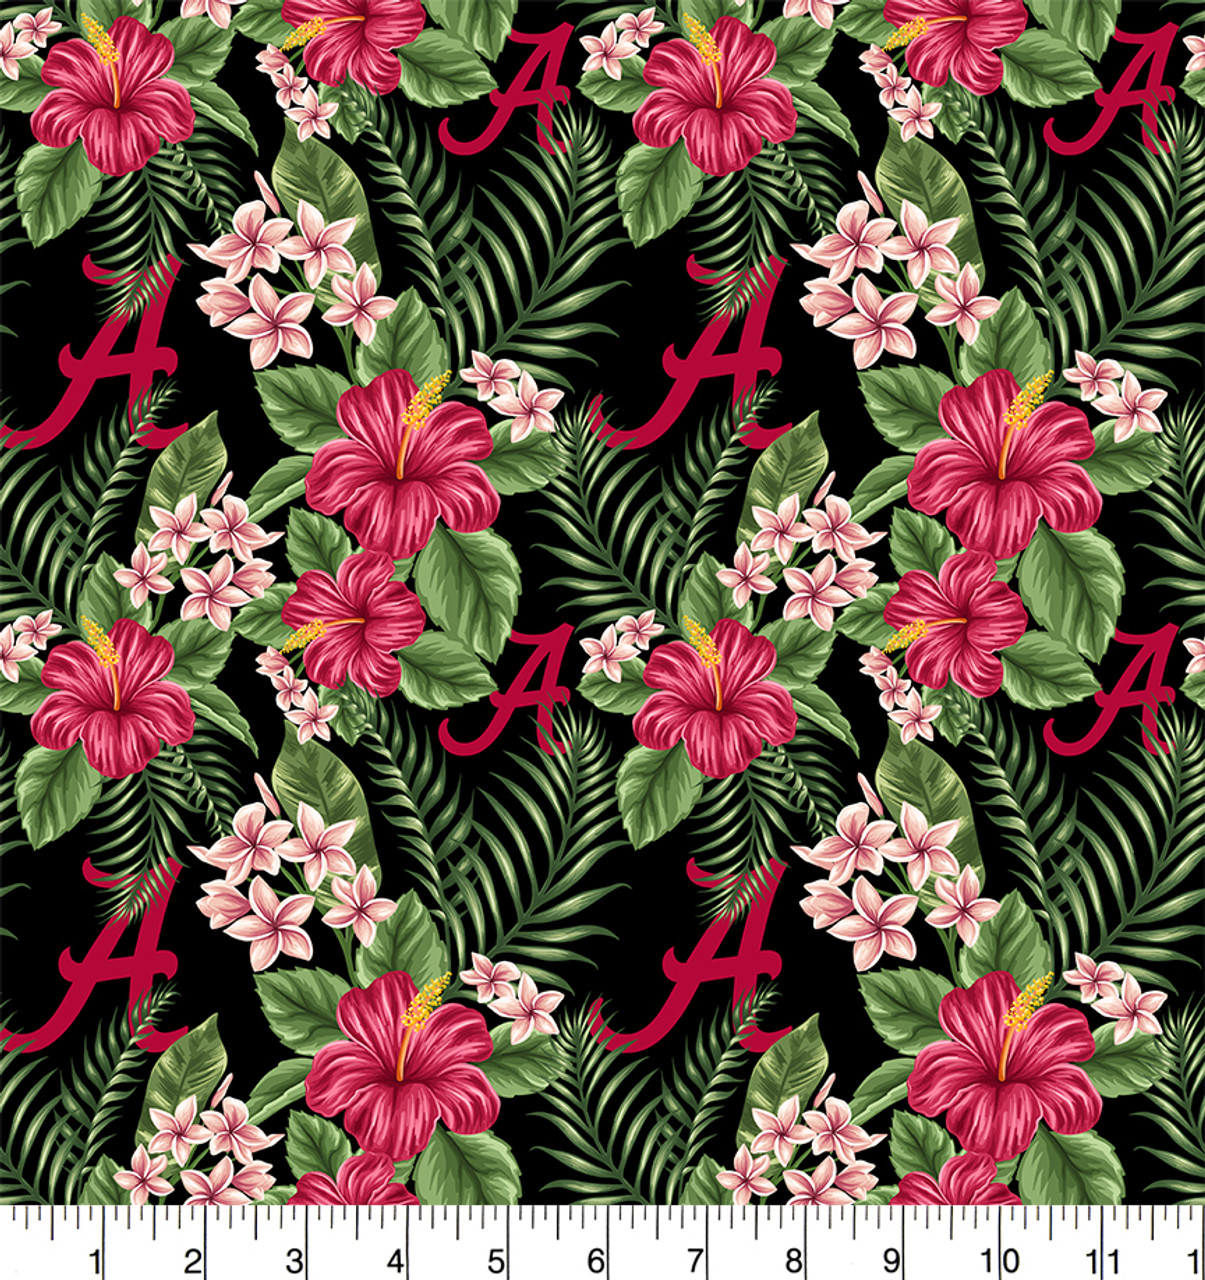 University of Alabama Crimson Tide Cotton Fabric with Tropical Print or Matching Solid Cotton Fabrics